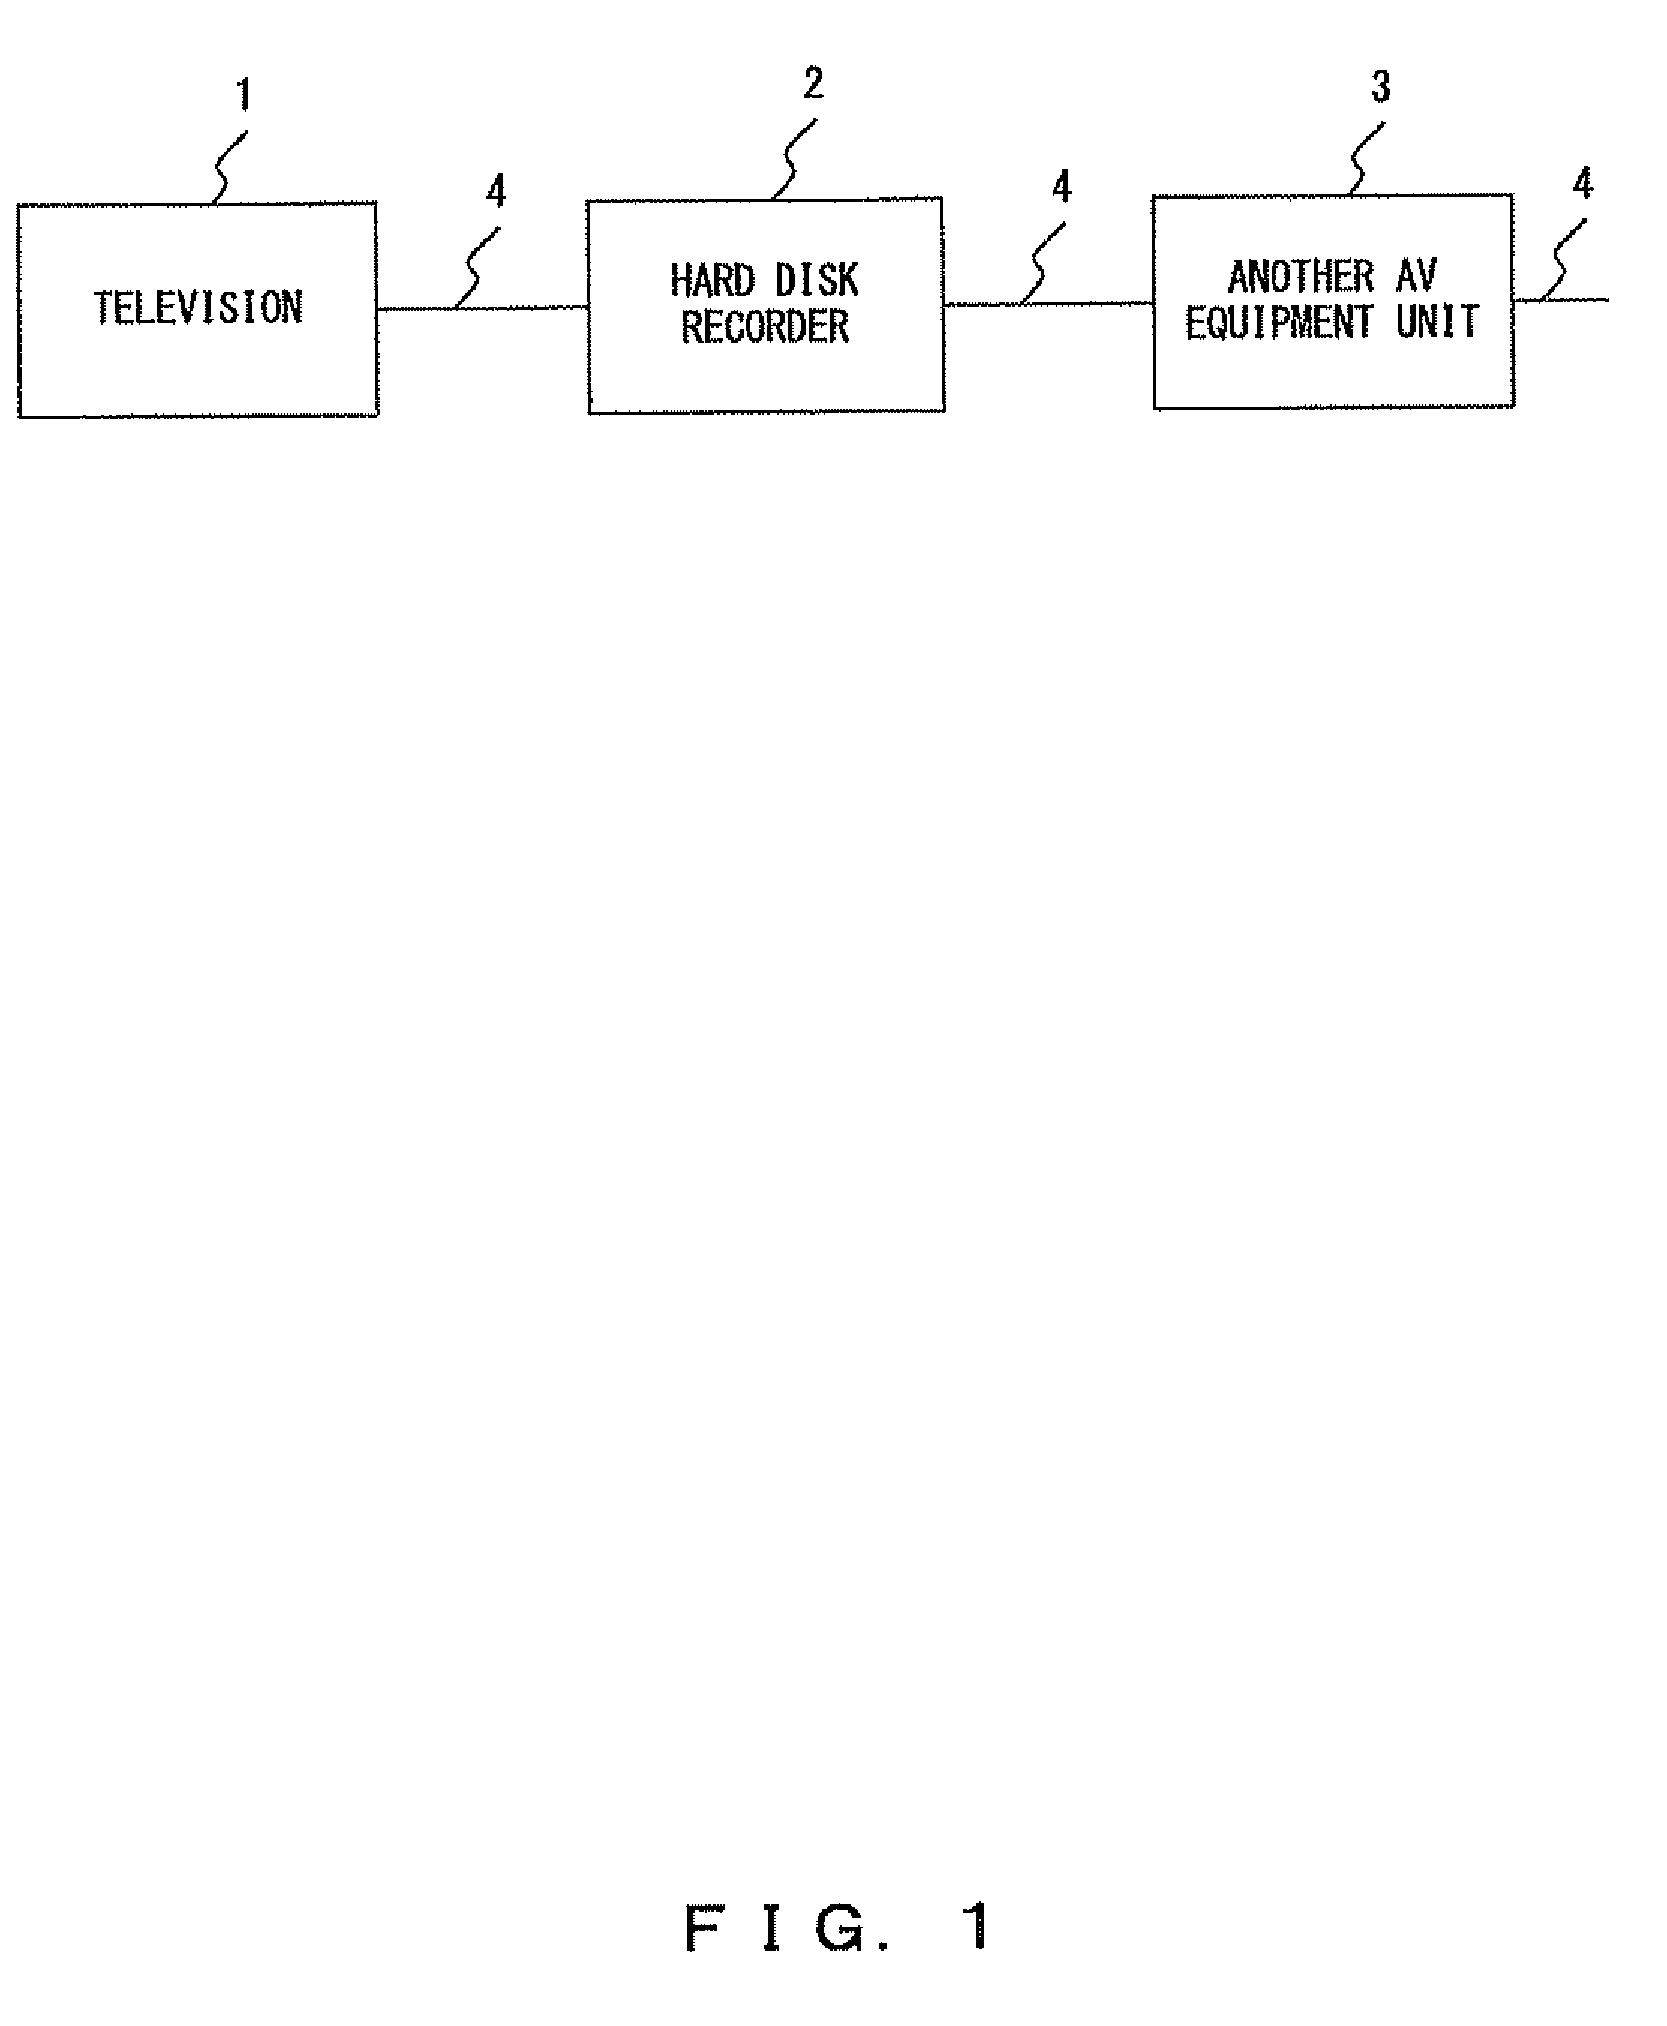 Interactive control apparatus using remote control signal between computer and electric home appliance